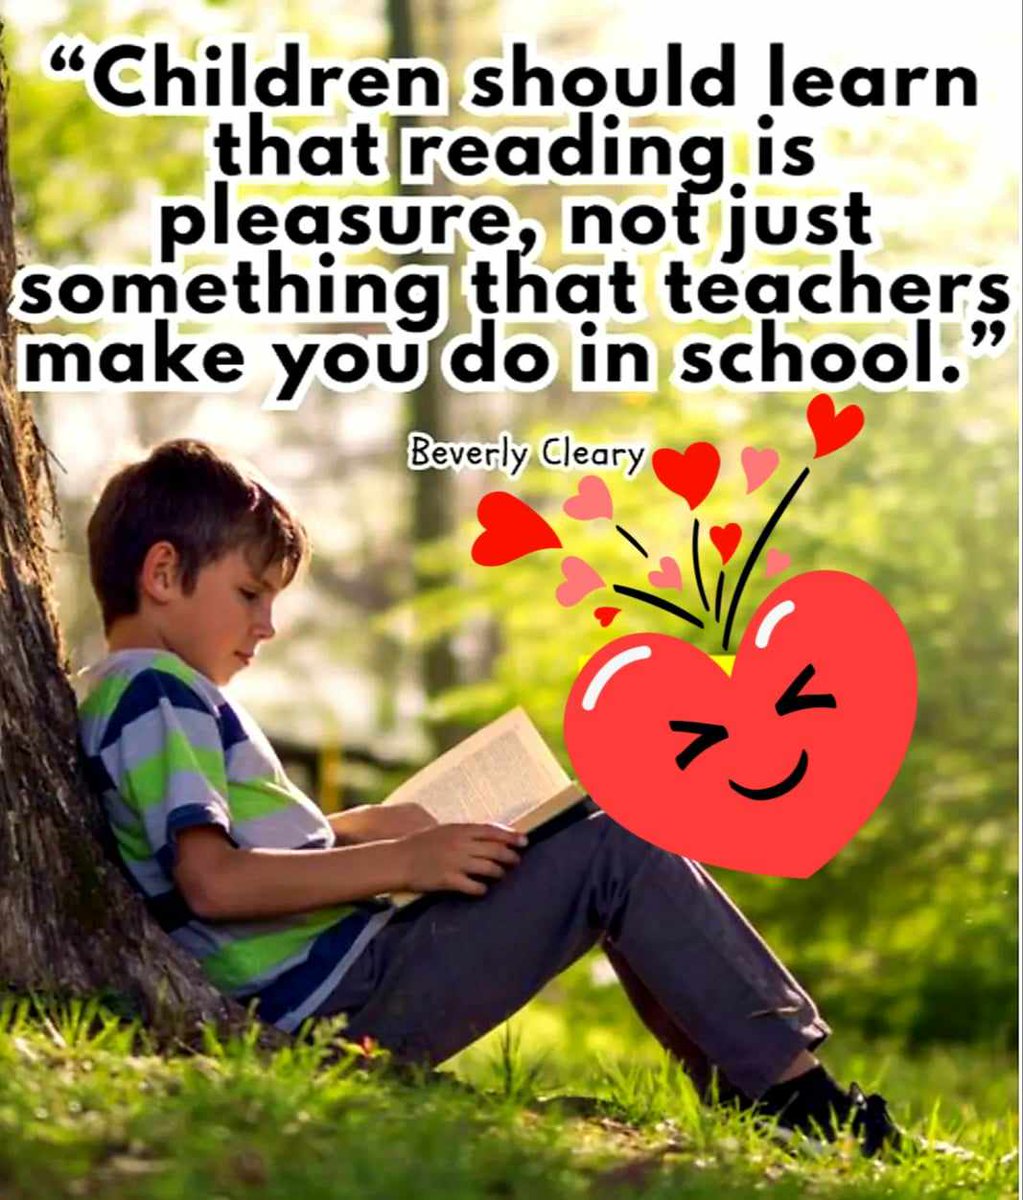 Parents, do you agree?
#etmulloney #bookstoread #forchildren #teens #BooksWorthReading #teaching #them #tobe #a #greatreader #understanding #learning #inlife #bestinformation #mindtreasure #anointedpathways #thteenagewealthypreneur #thteenagehealthypreneur #inkoftears #BookTwit